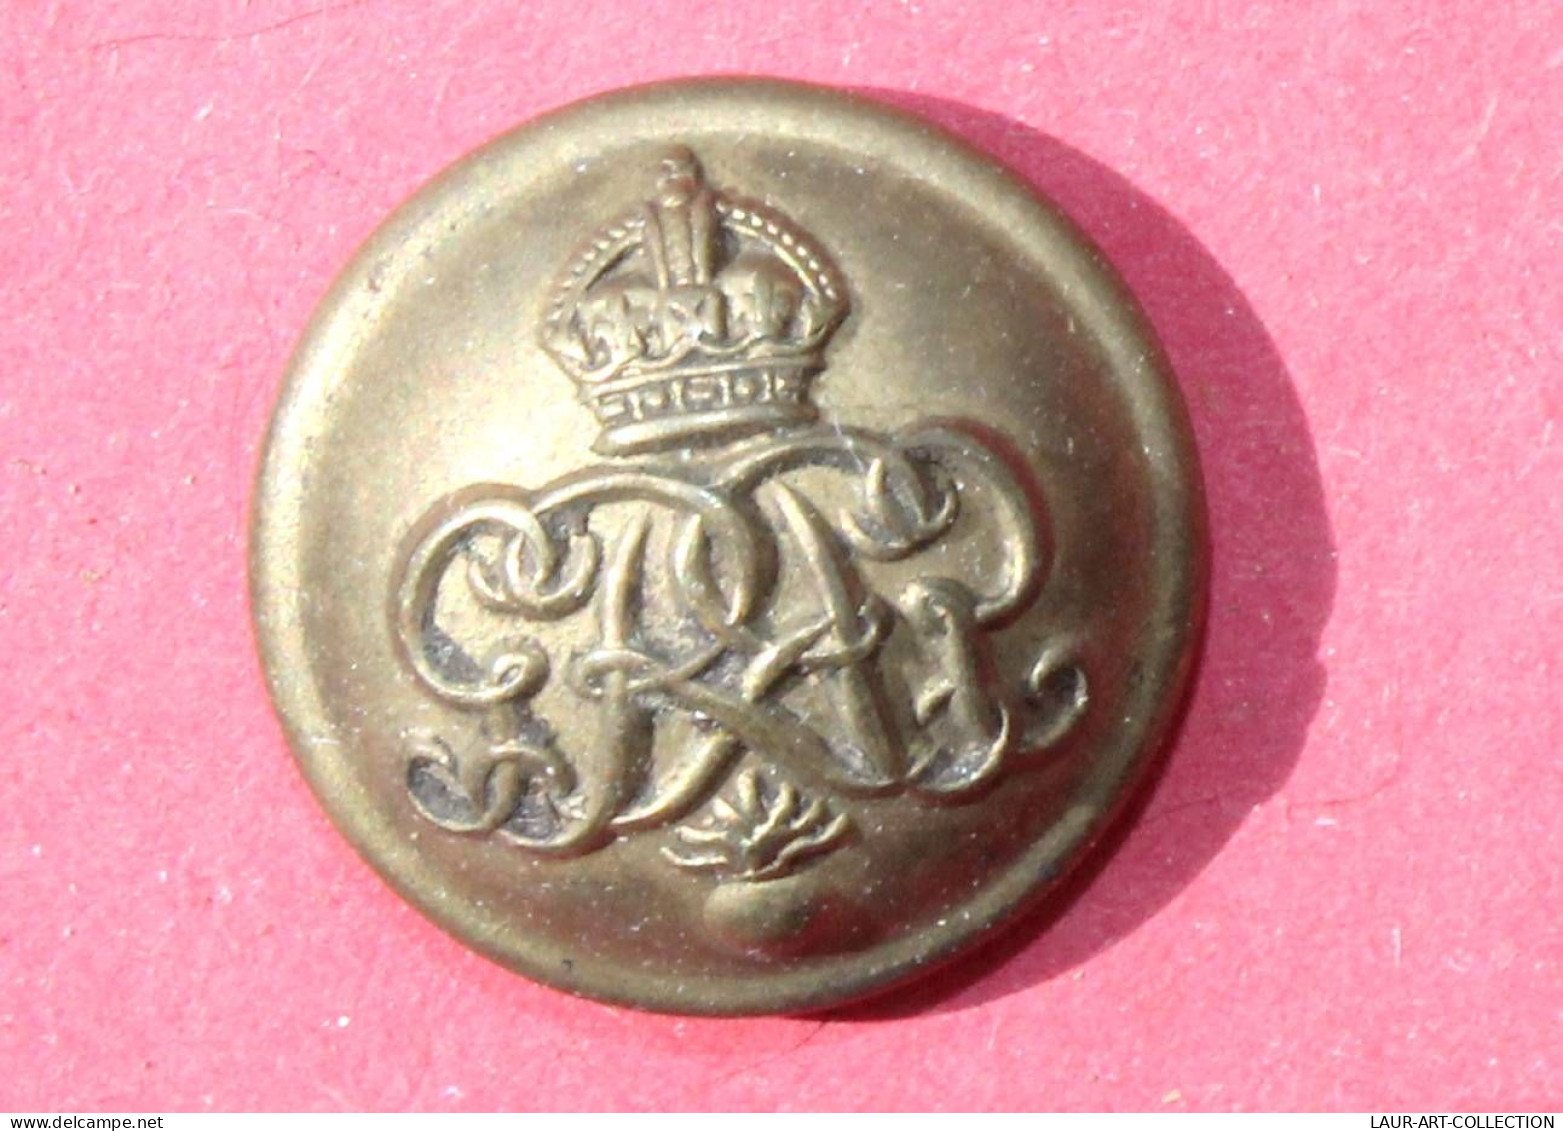 BOUTON UNIFORME MILITAIRE ANGLAIS INITIALE, GRRG, ROYAL ARMY SERVICE CORPS, 19mm / BUTTON ENGLAND MILITARIA (2203.376) - Knoppen